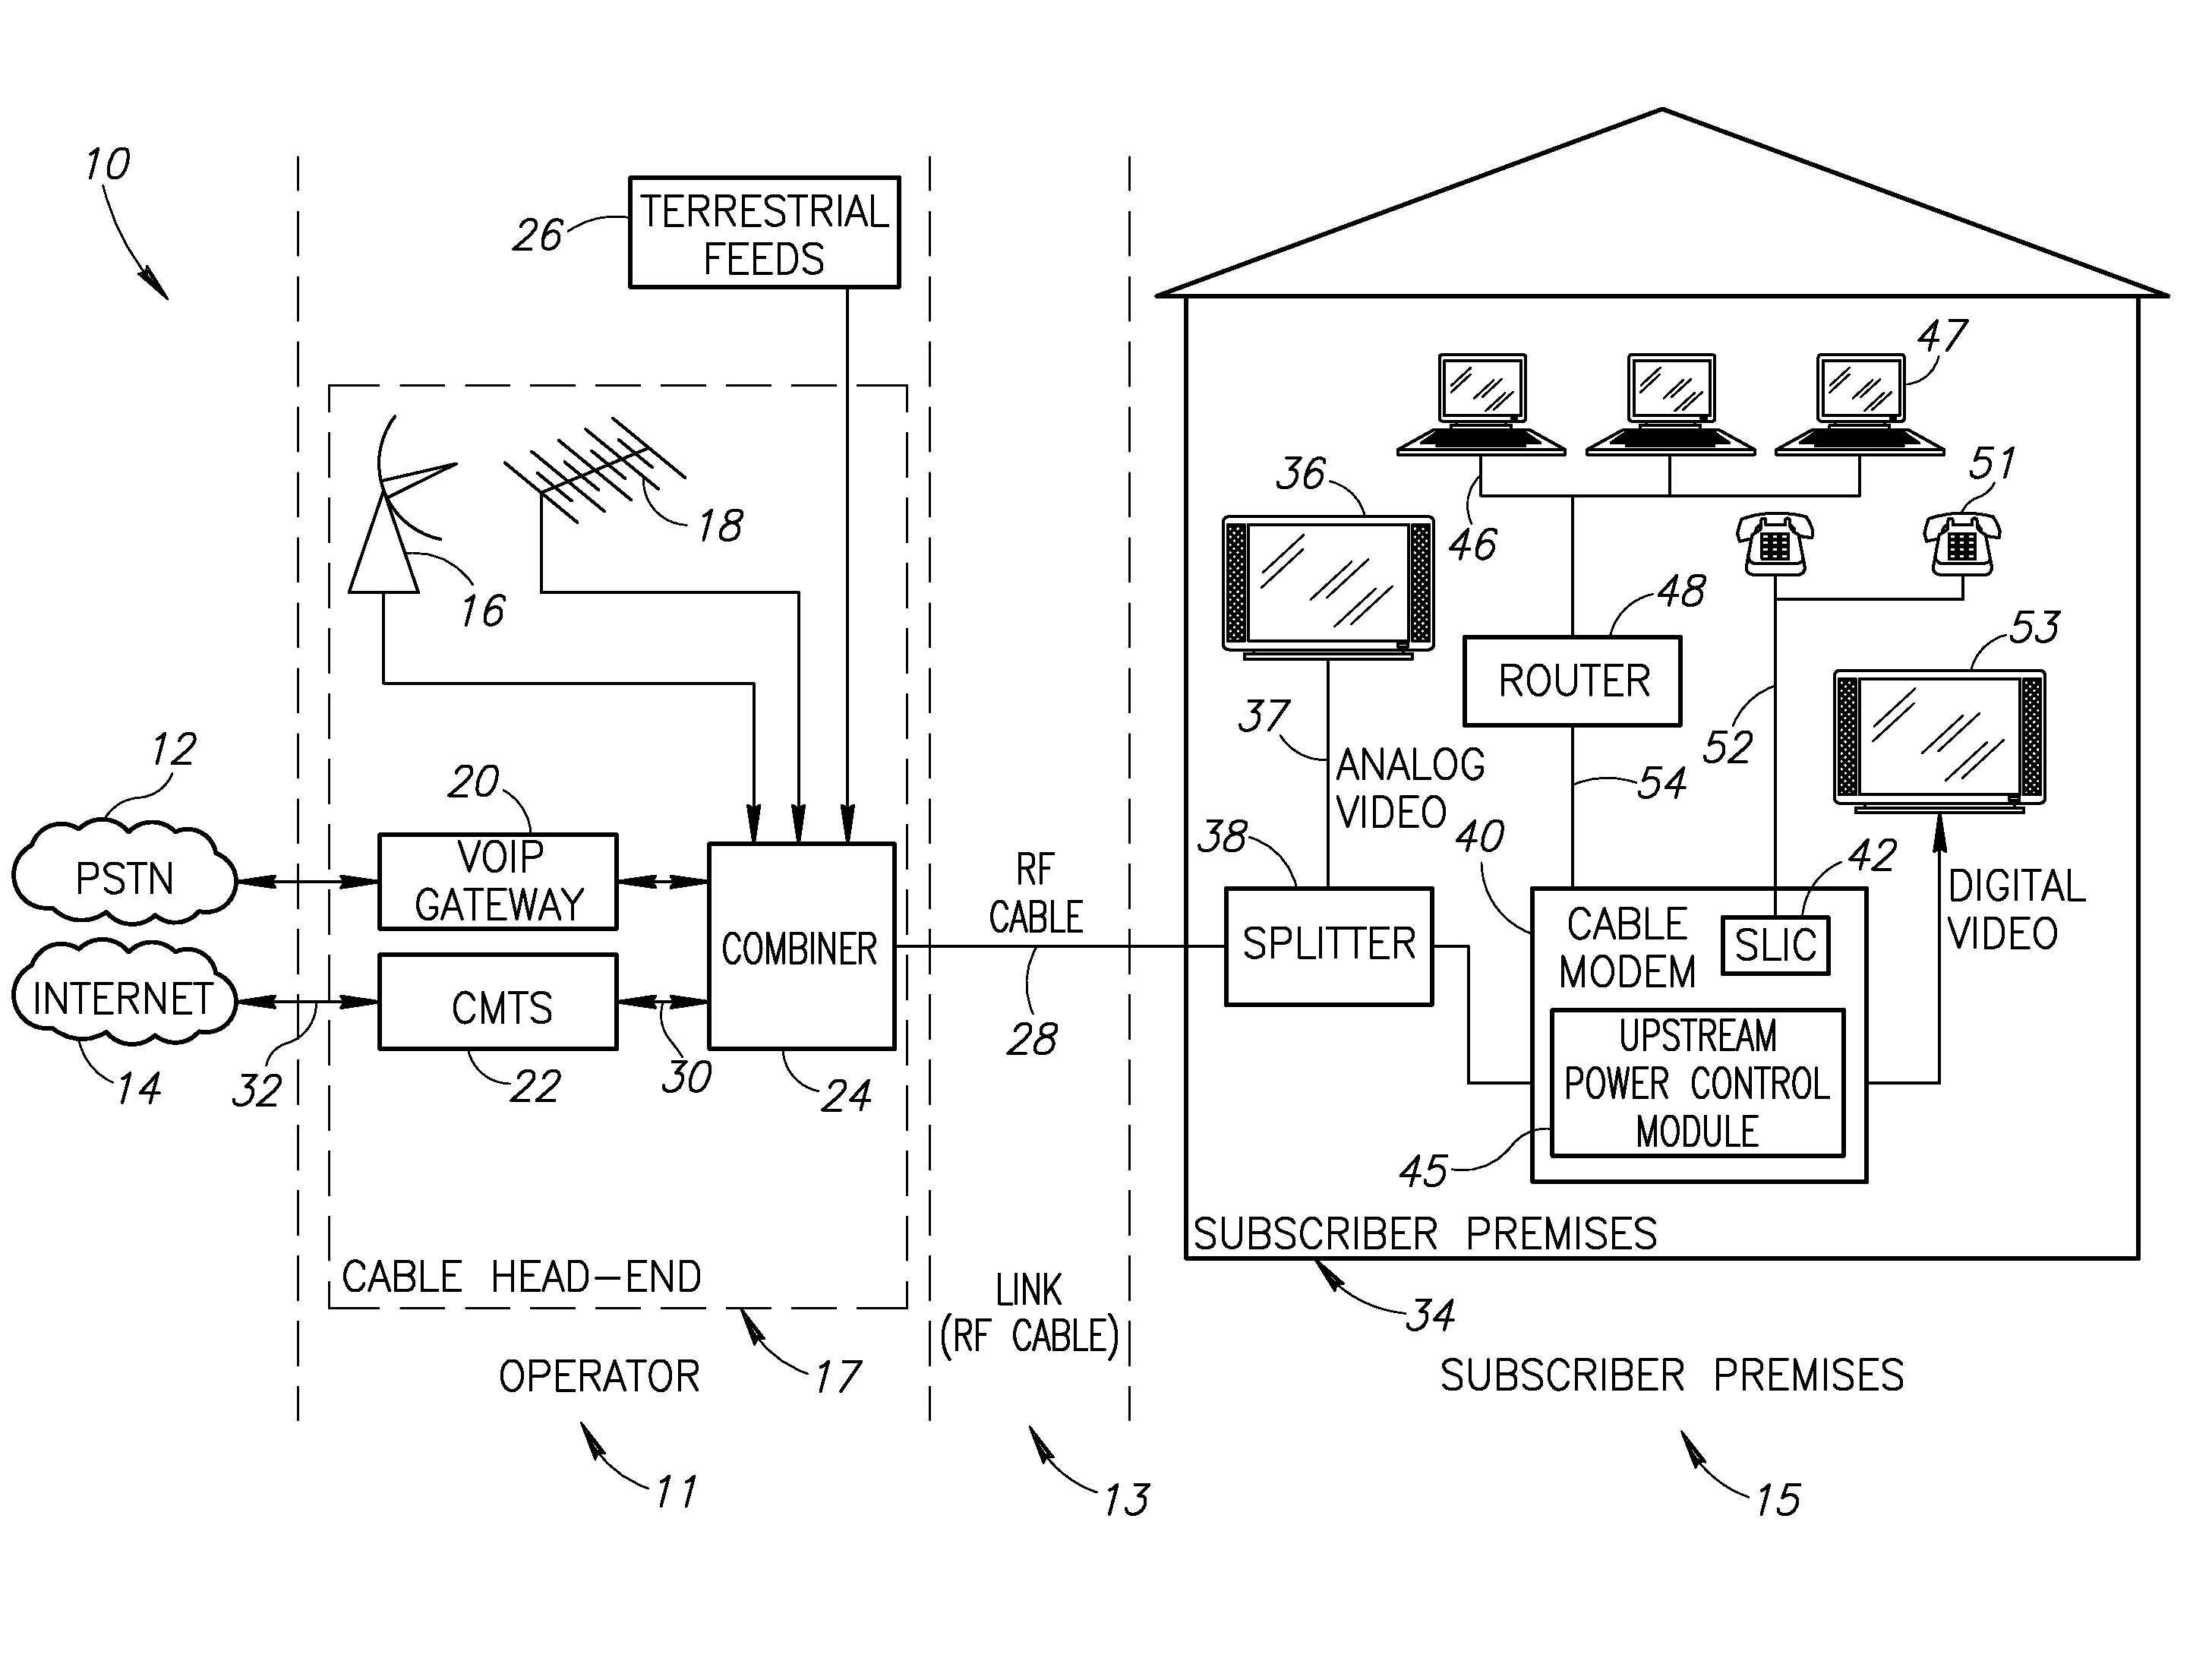 Upstream power control for multiple transmit channels